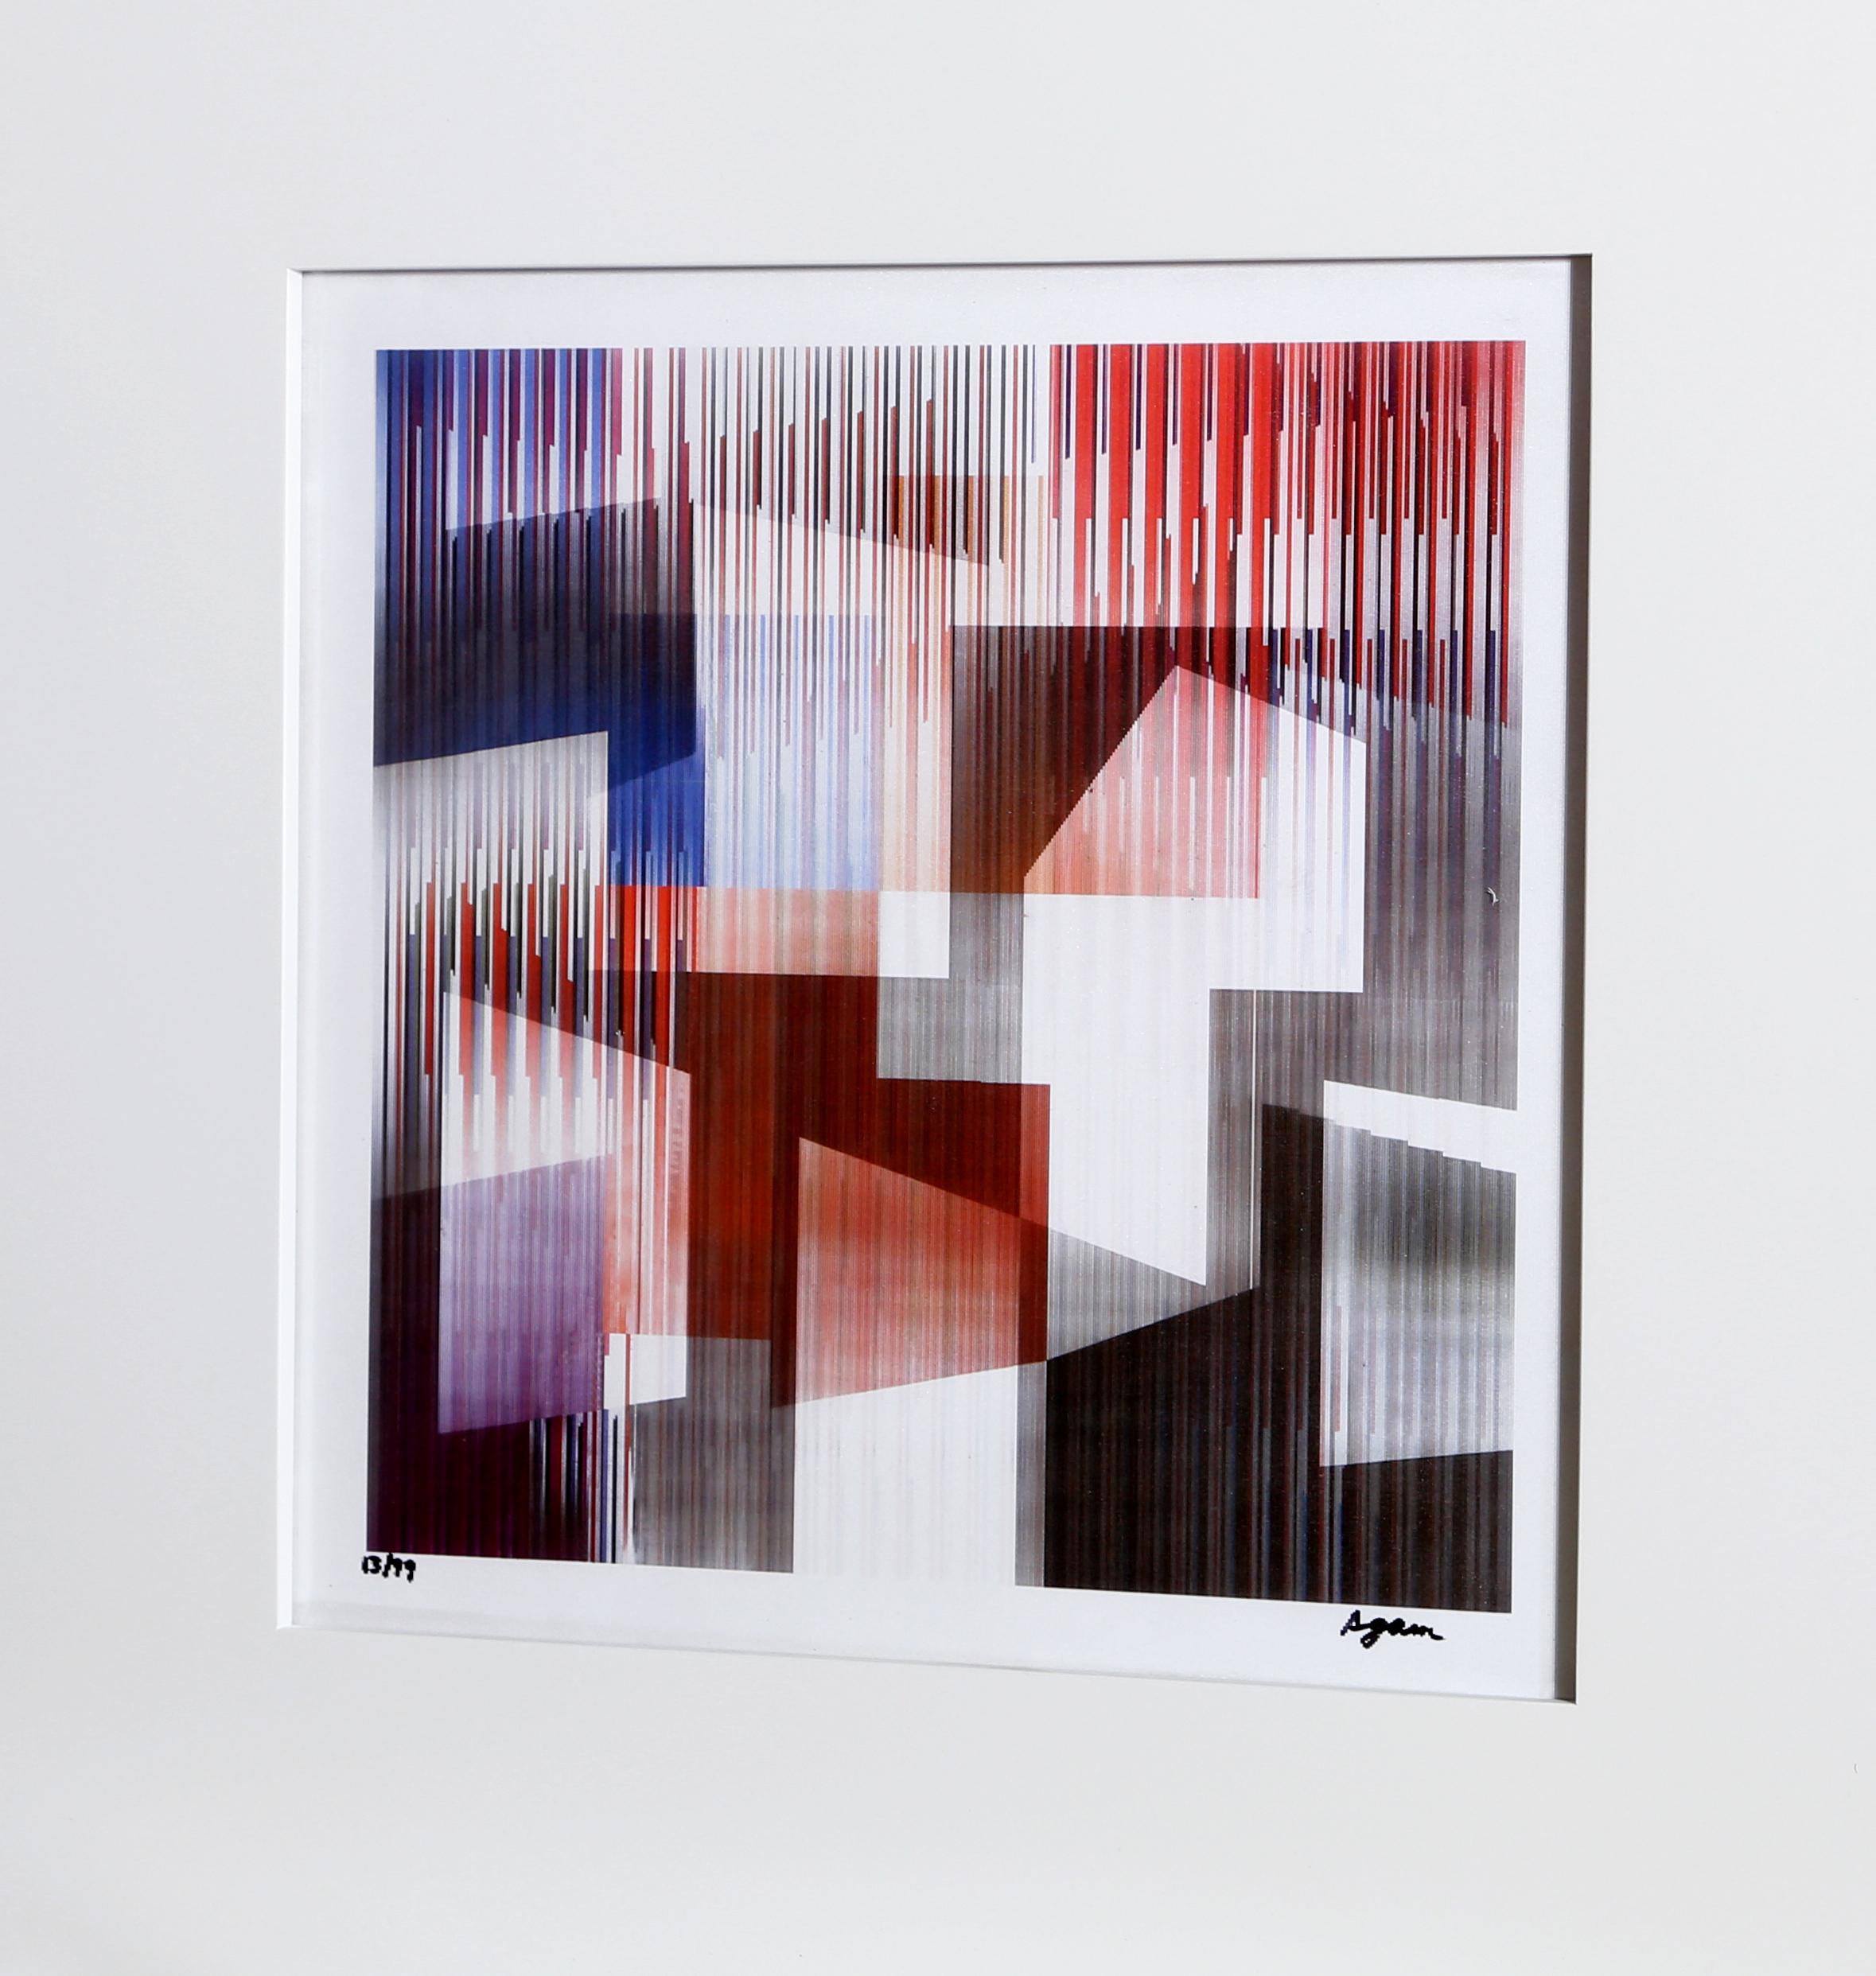 The Agamograph is Agam’s unique contribution to the OP Art movement. The object is a print behind a lenticular surface that fools the eye to show movement and three-dimensional depth. The work is hand-signed and numbered in marker by the